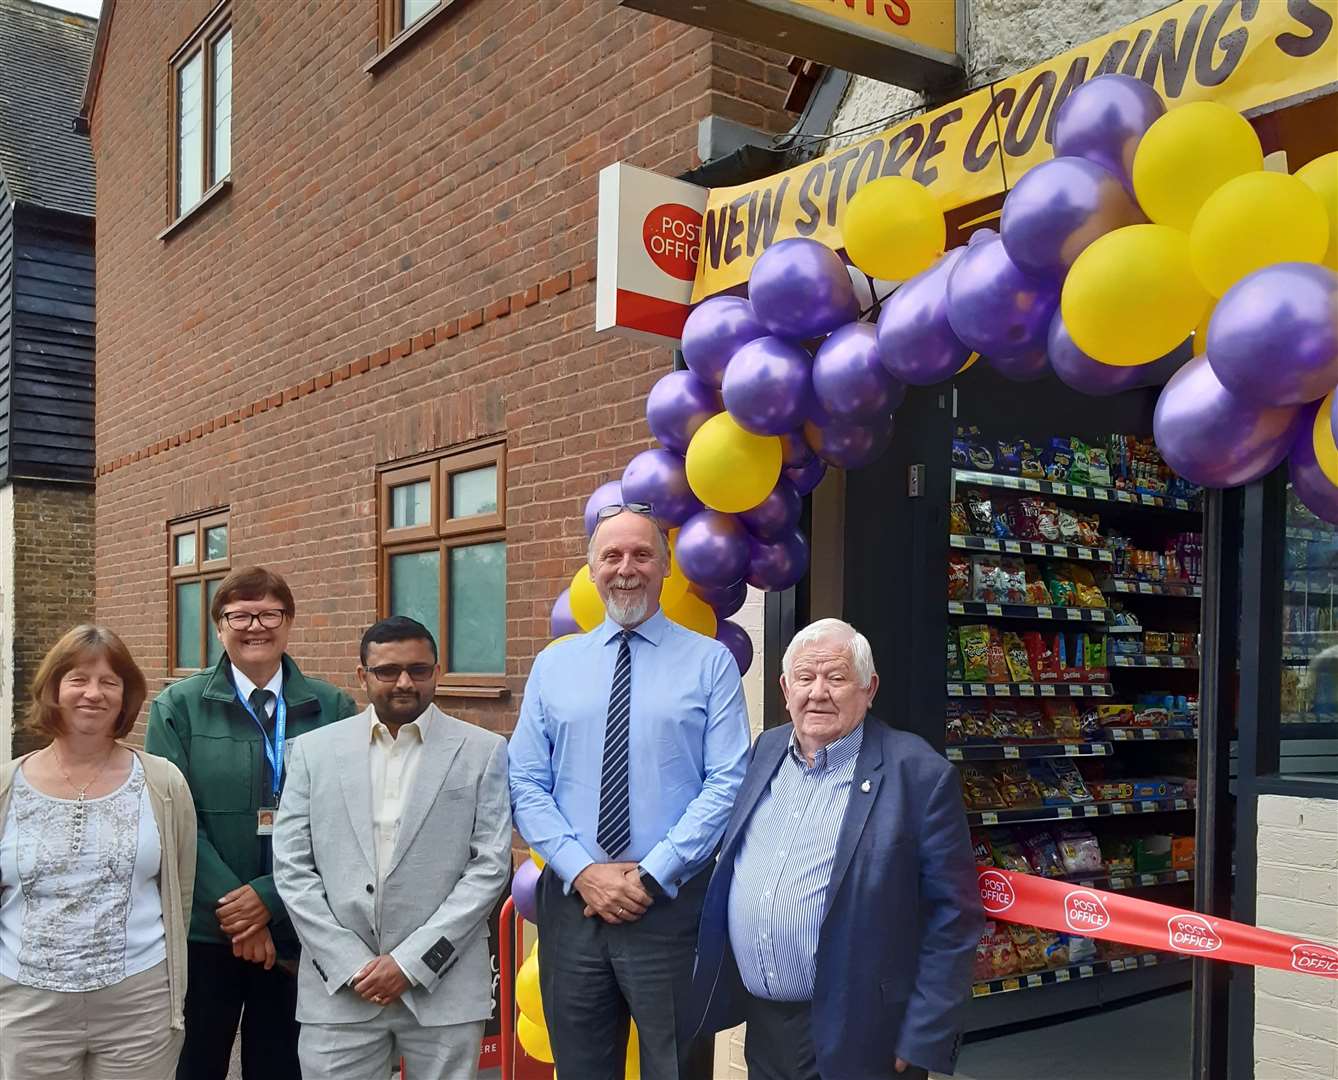 From left, Cllr Penny Cole, community warden Jackie West, postmaster Karthikeyan Khartik, Cllr Perry Cole and Cllr Larry Abraham. Picture: Post Office